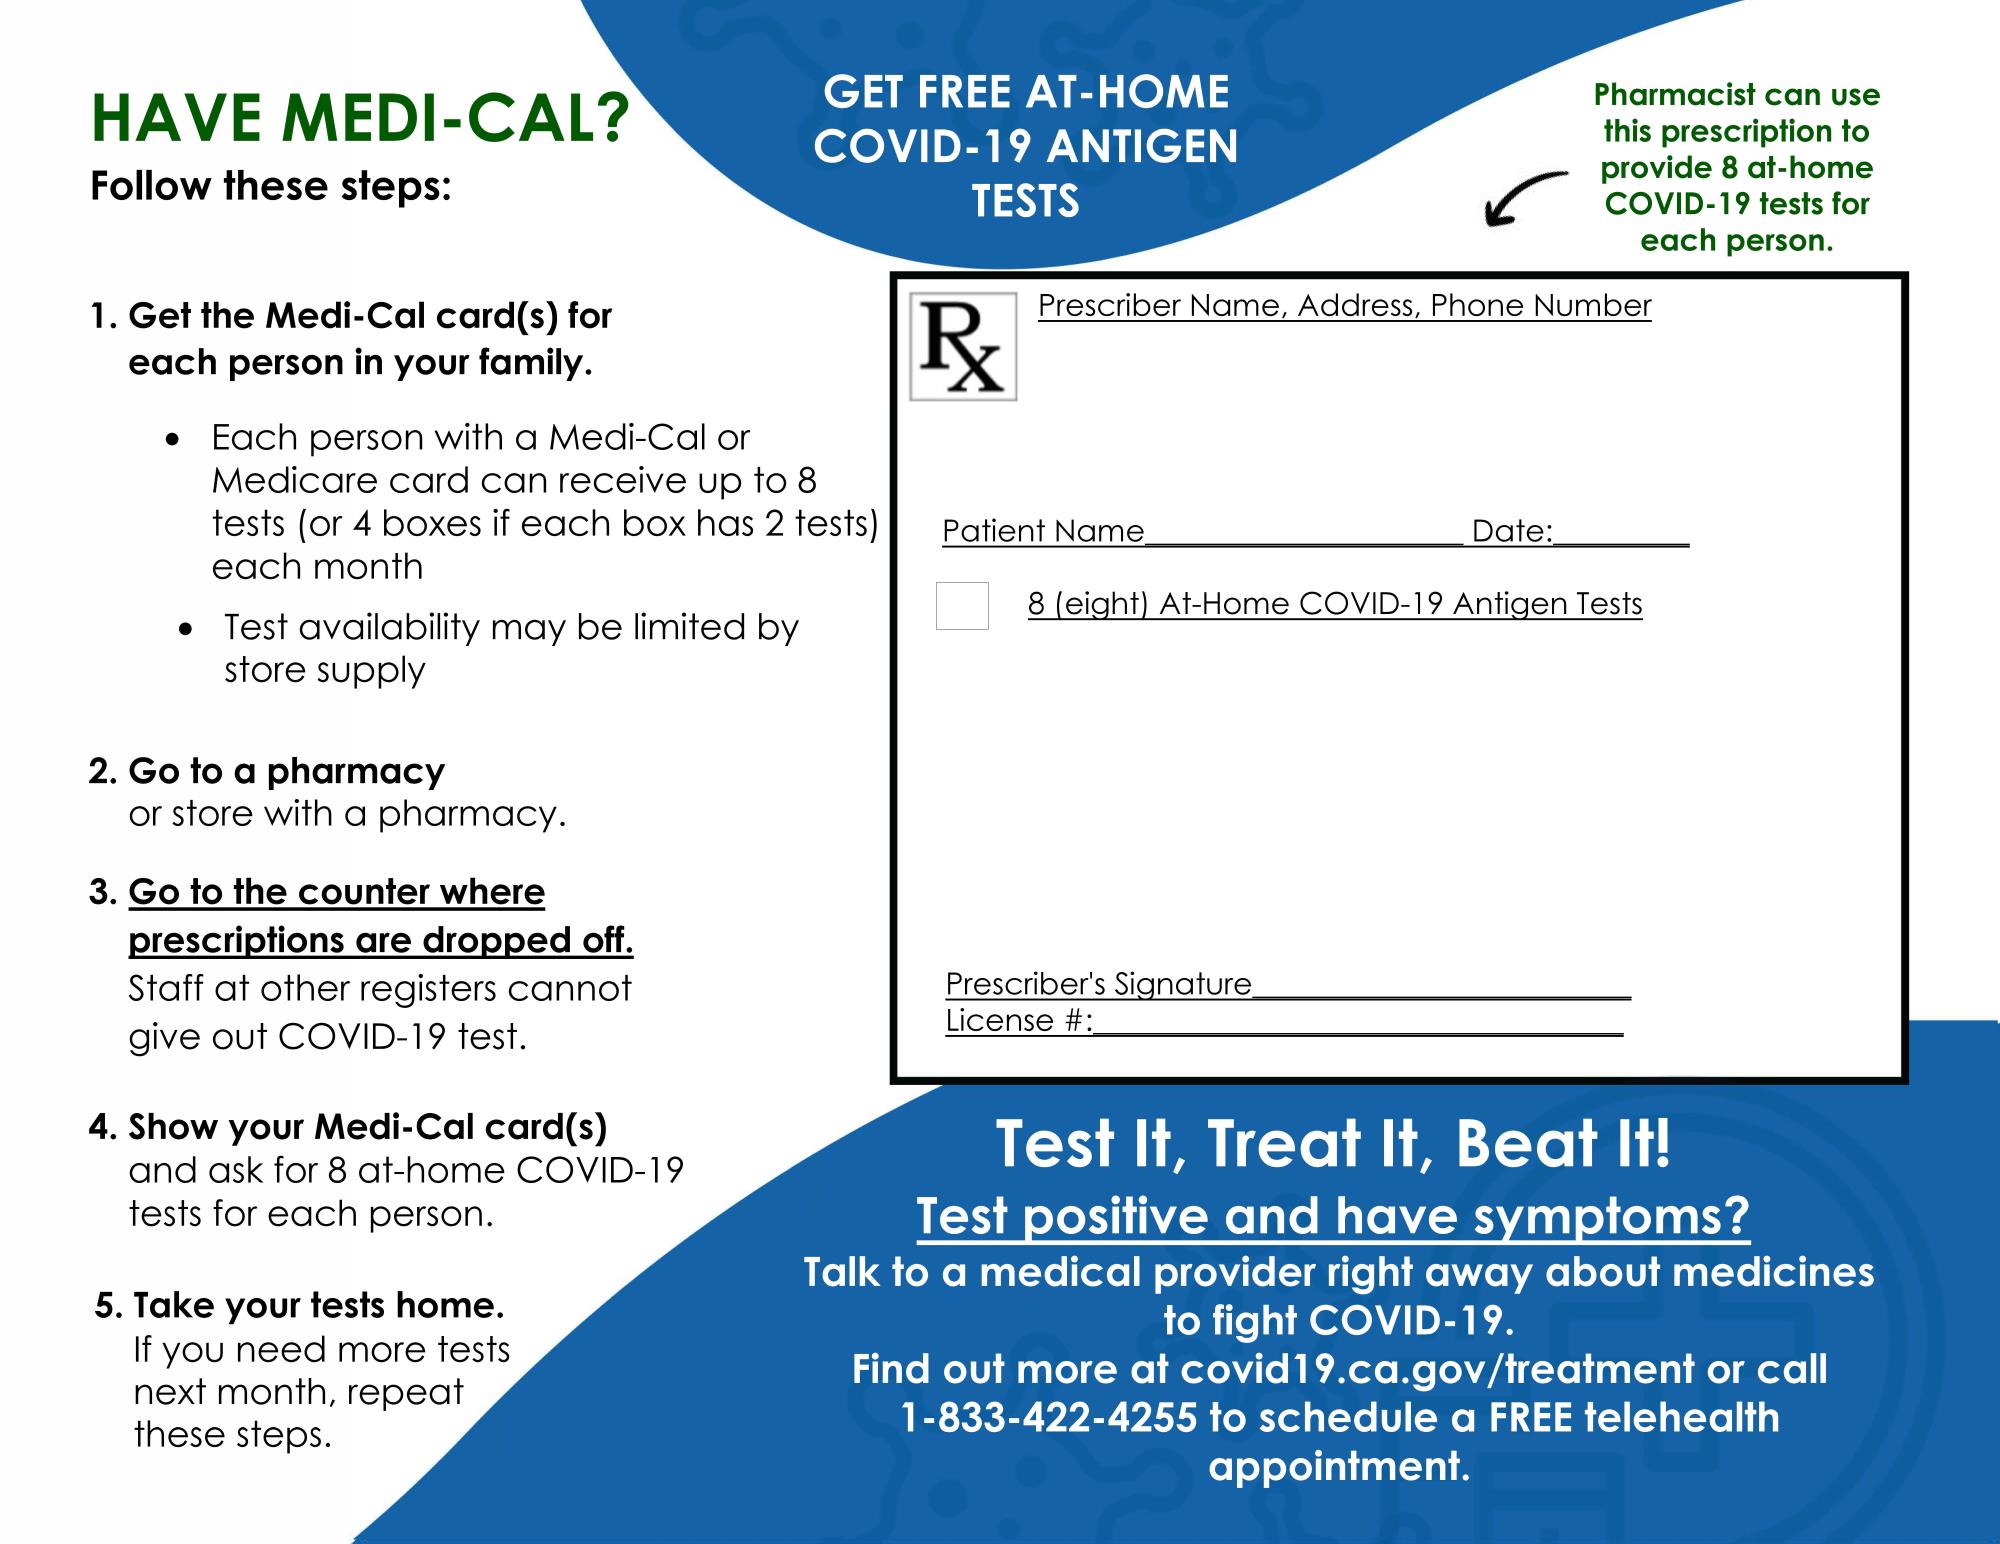 Infographic summarizing How to get FREE at-home COVID-19 Antigen tests.